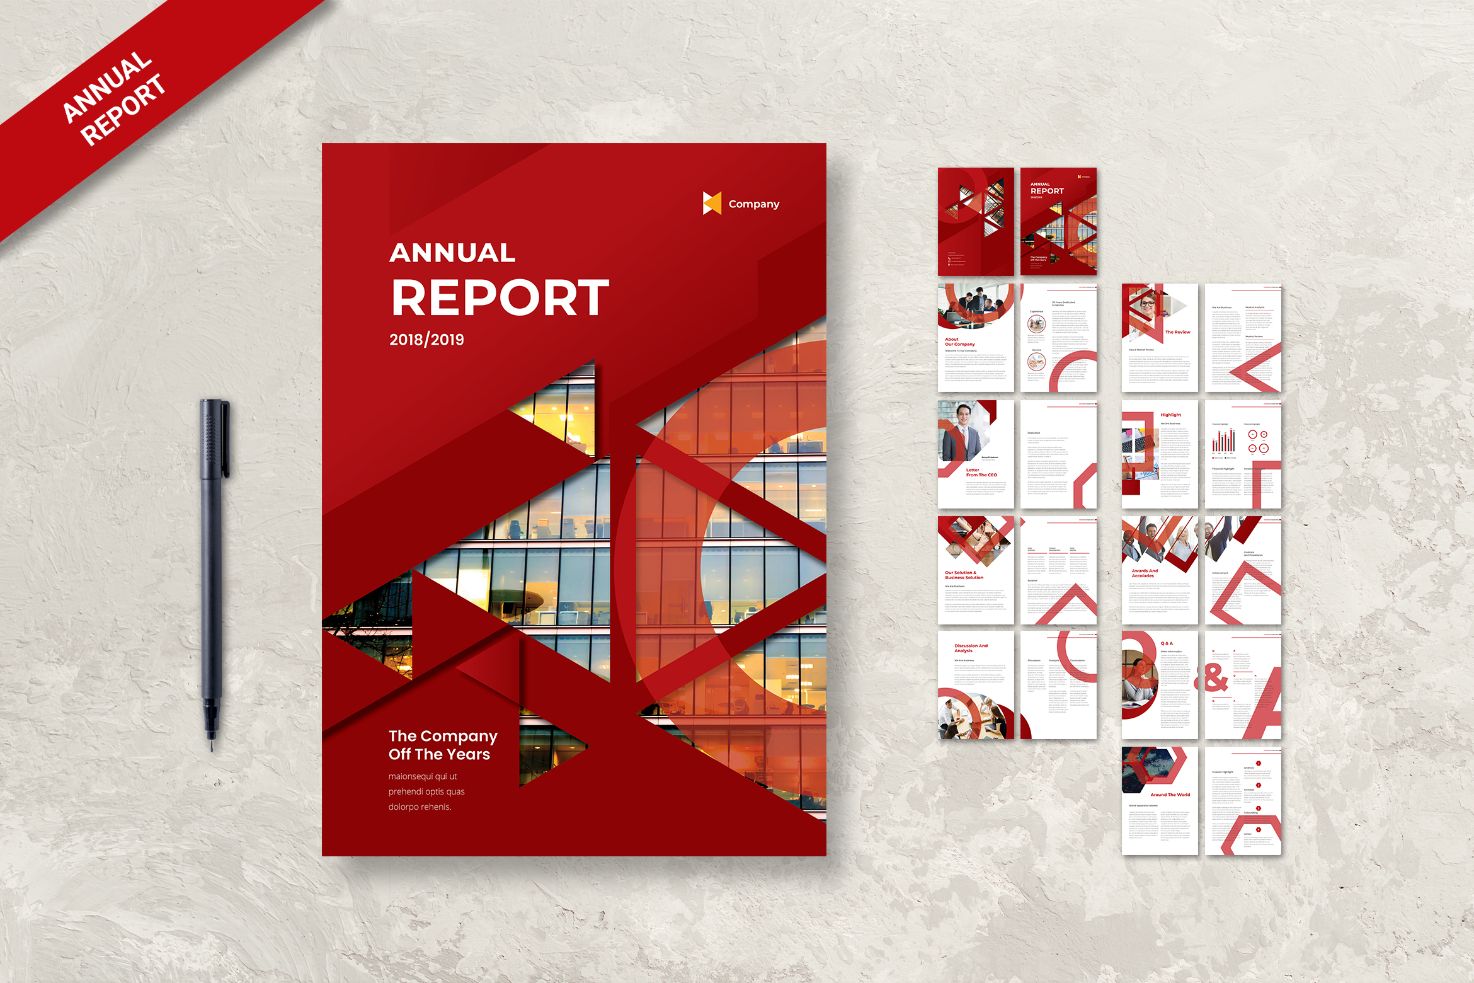 Geometric Design Modern Annual Report Template - Red and White Theme